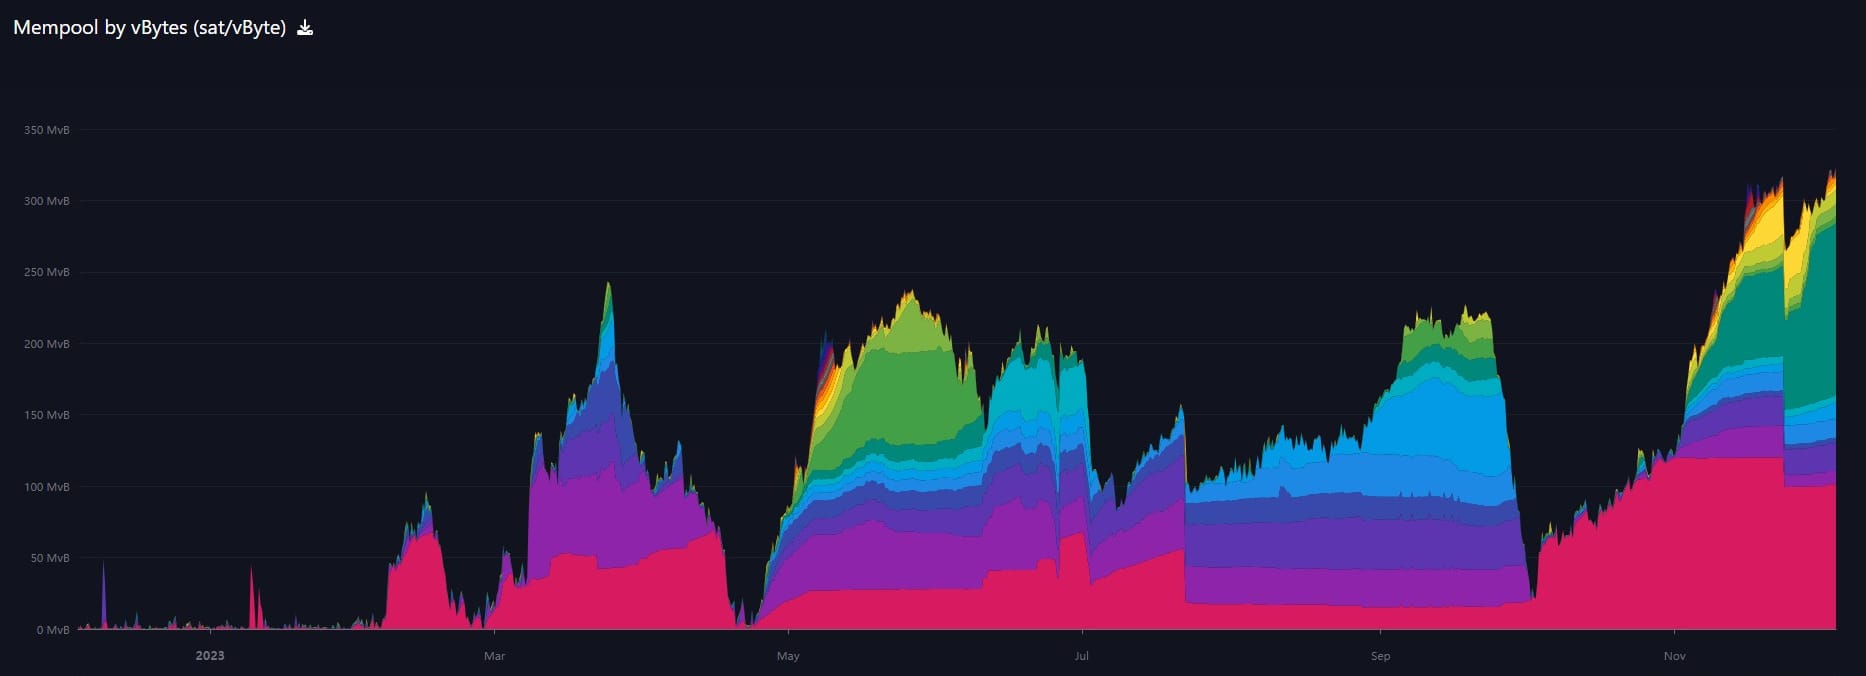 1-year chart of mempool, mempool.space